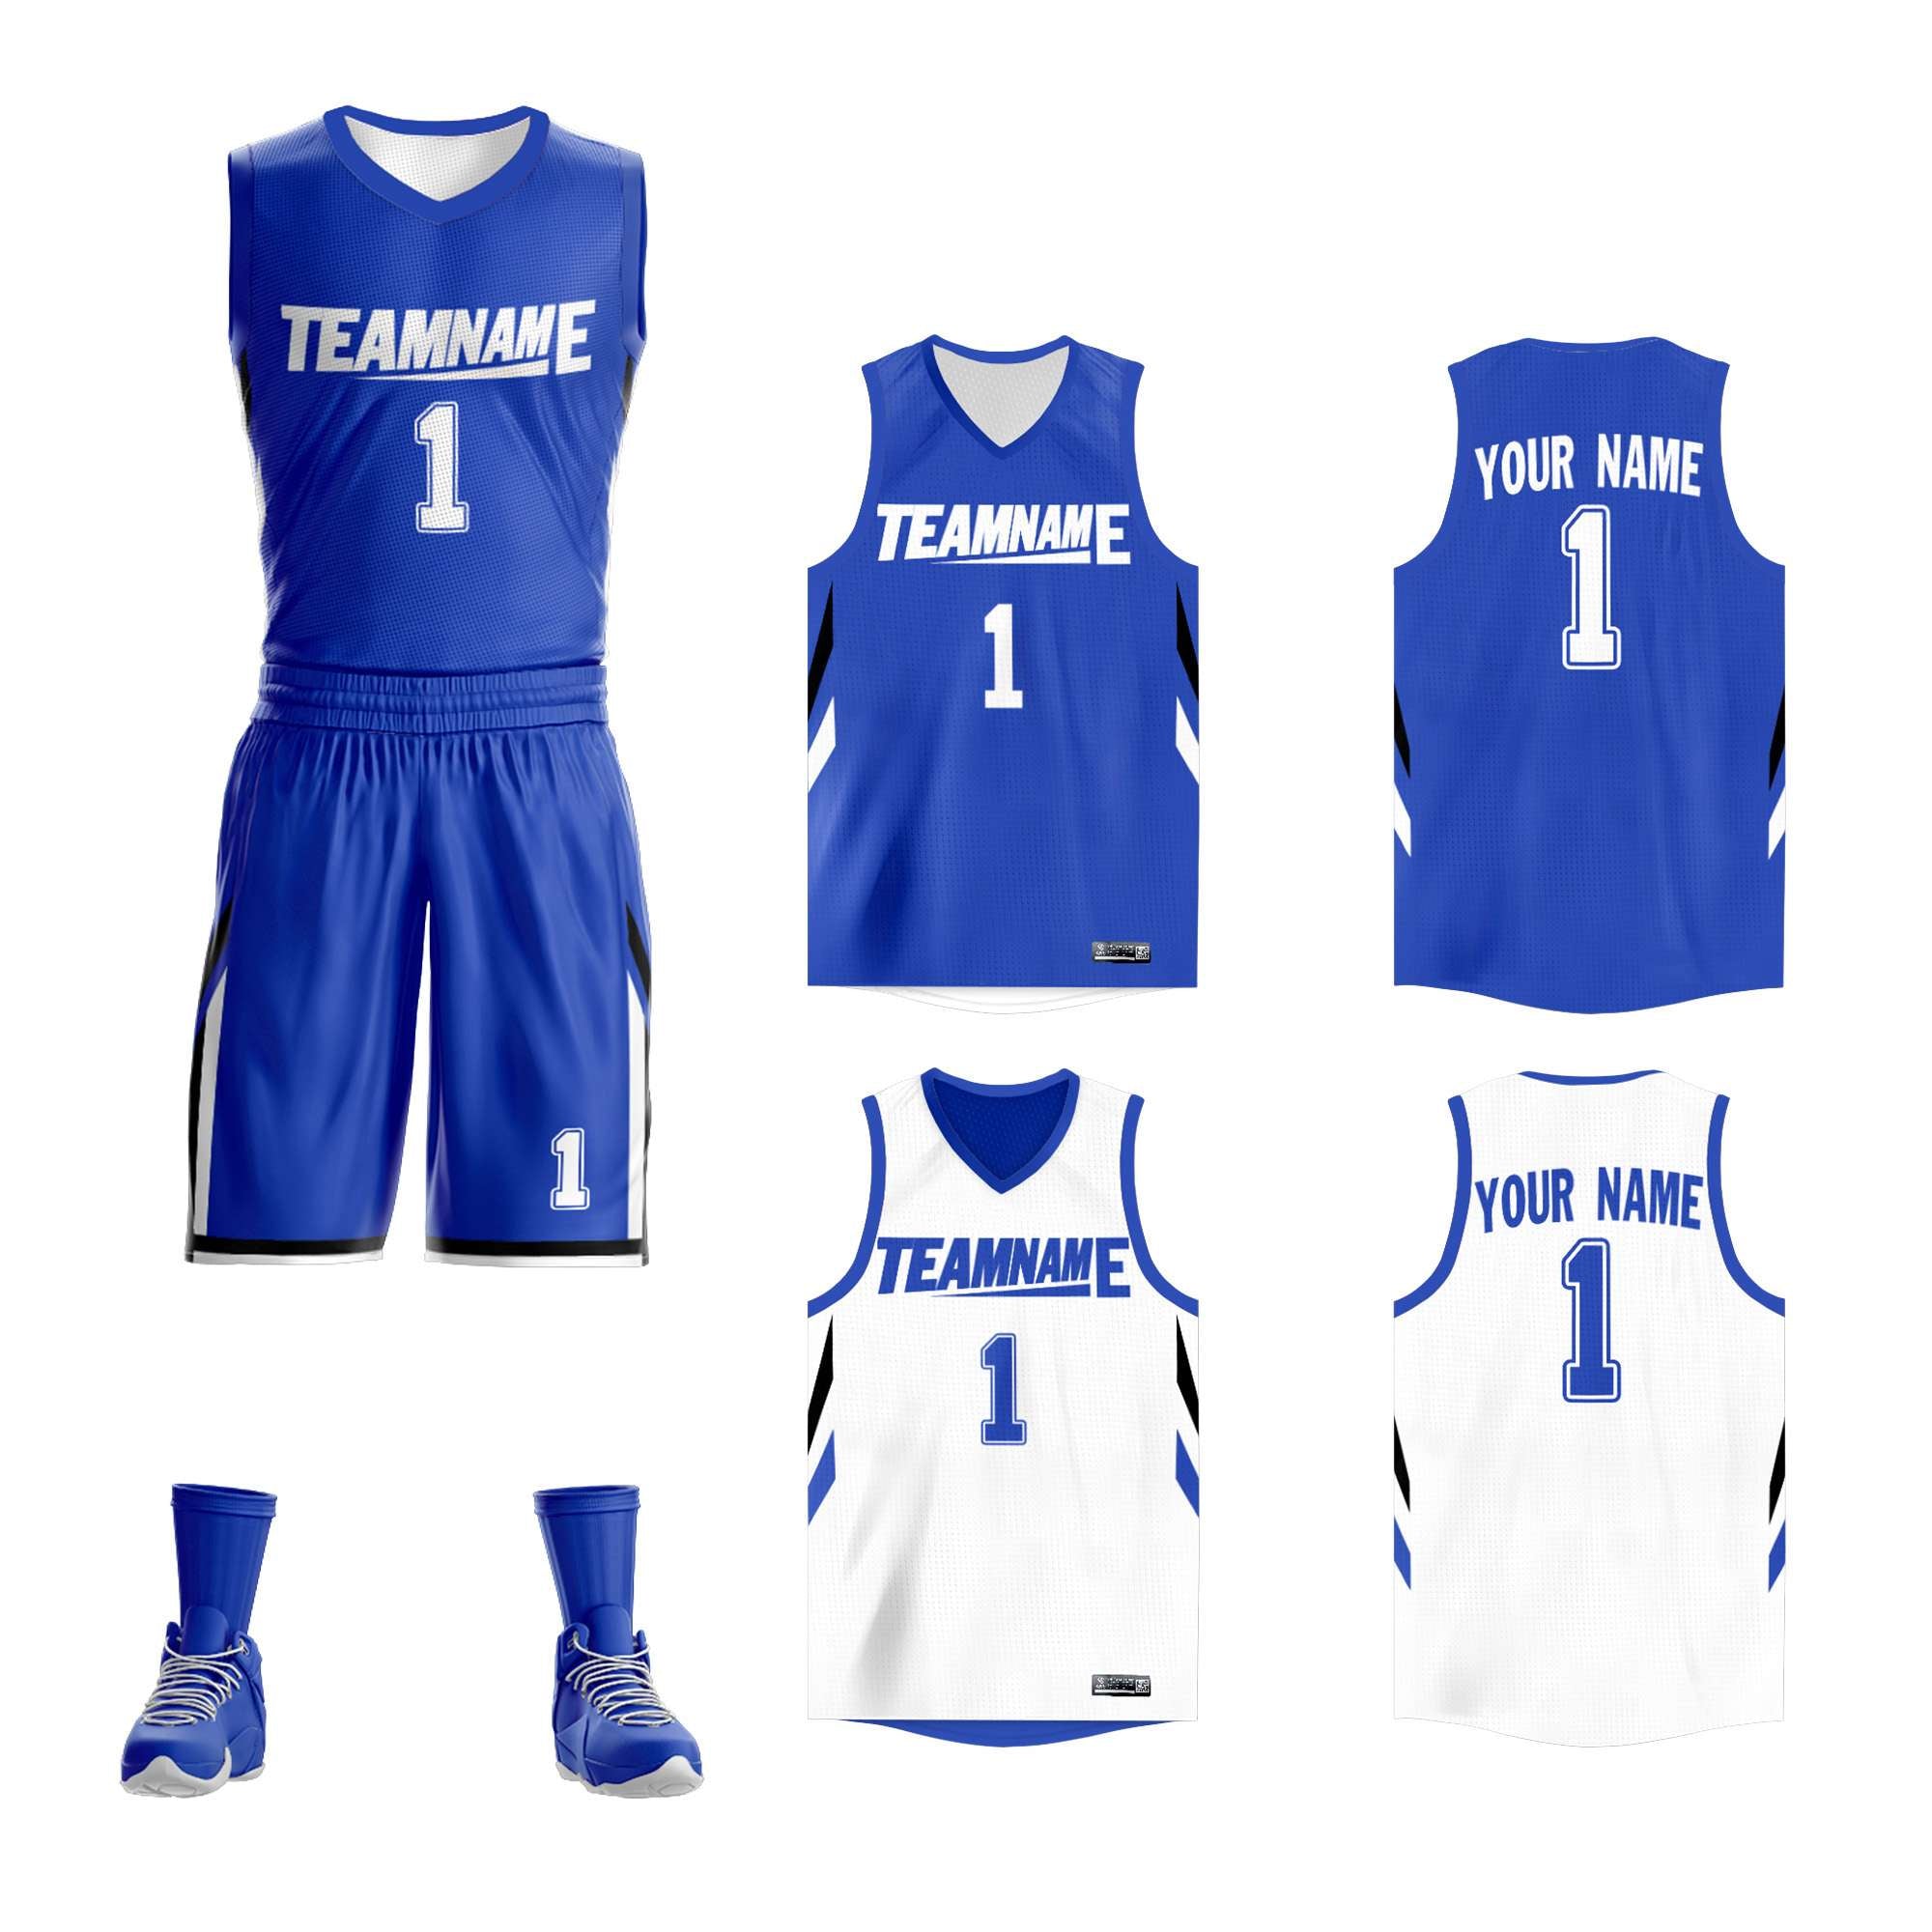 royal and white reversible basketball jersey for team